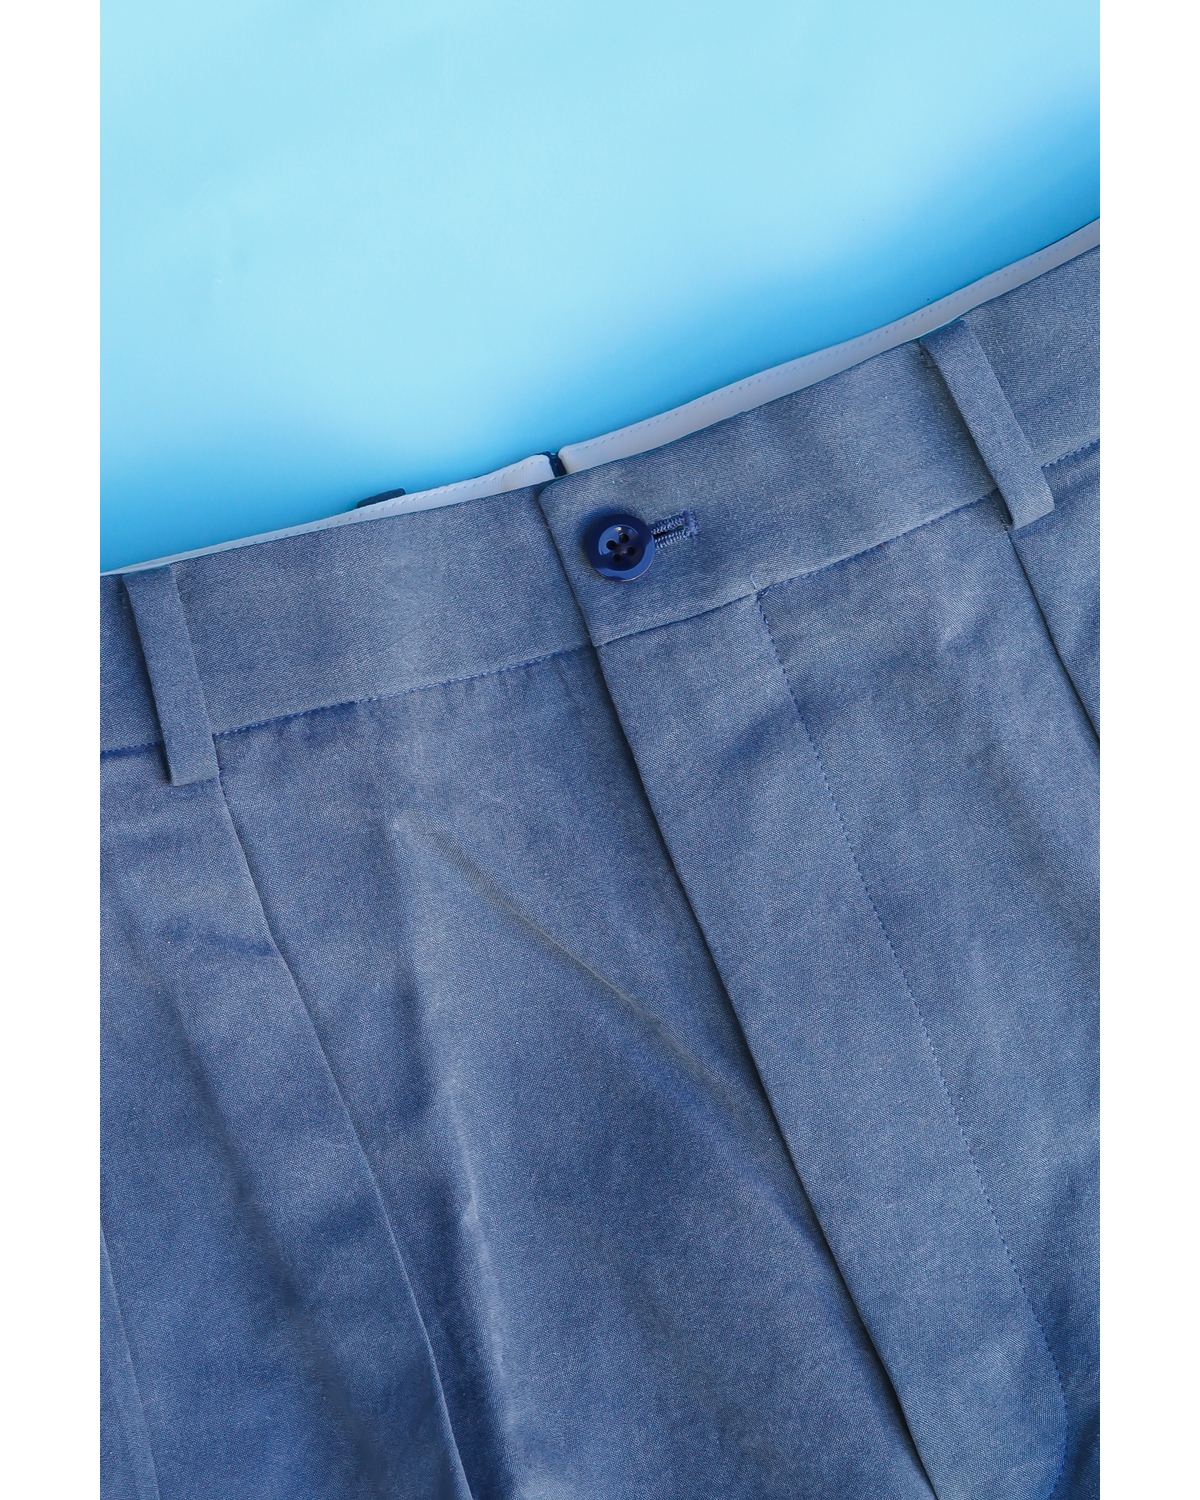 NEAT Chino | CELLULOSE NIDOM - Blue Gray <EXCLUSIVE>｜NEAT